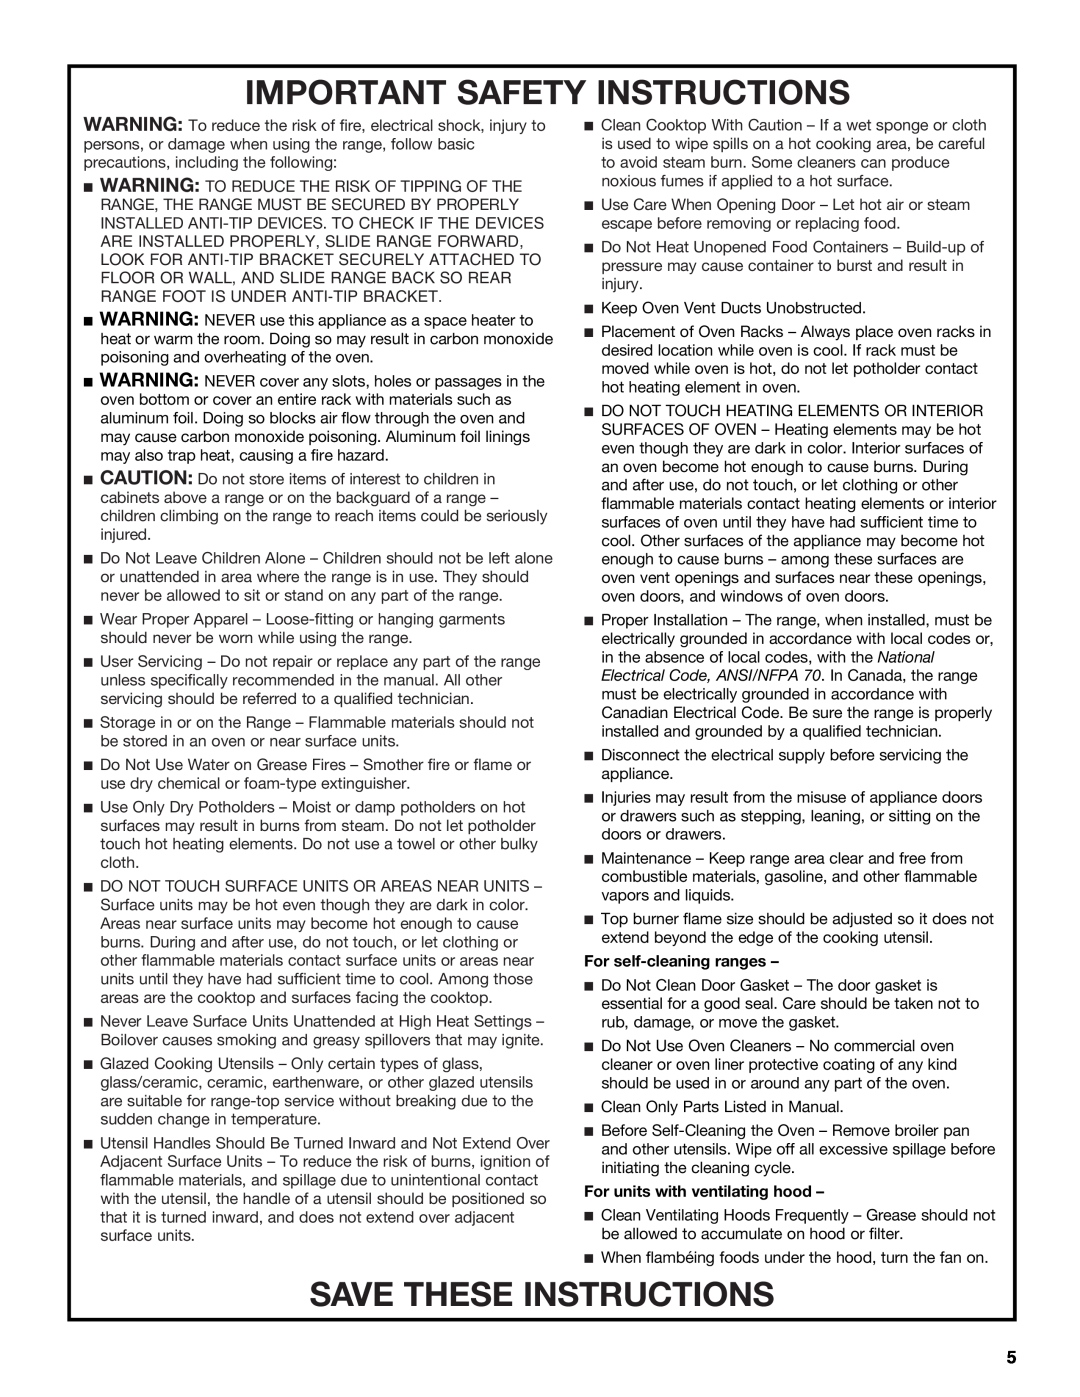 Jenn-Air JDS8850, JDS8860 manual Important Safety Instructions, Save These Instructions, For self-cleaningranges 